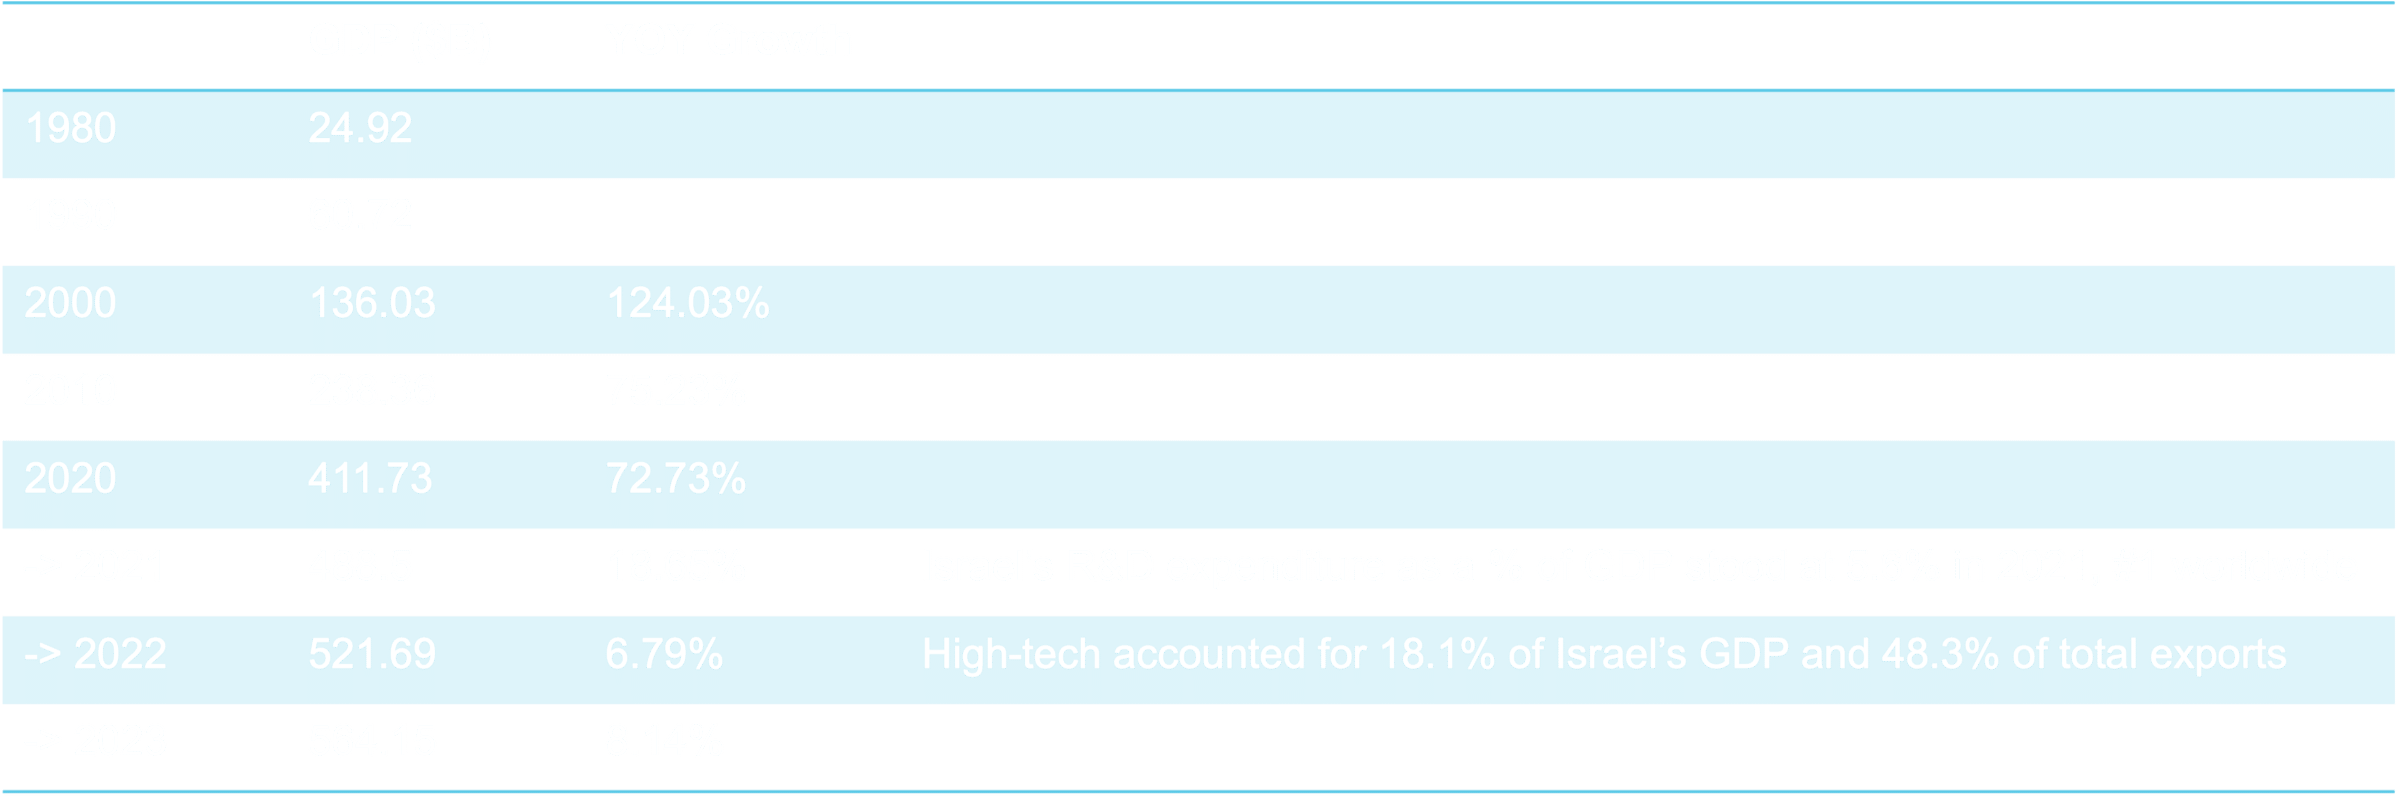 GDP growth in Israel